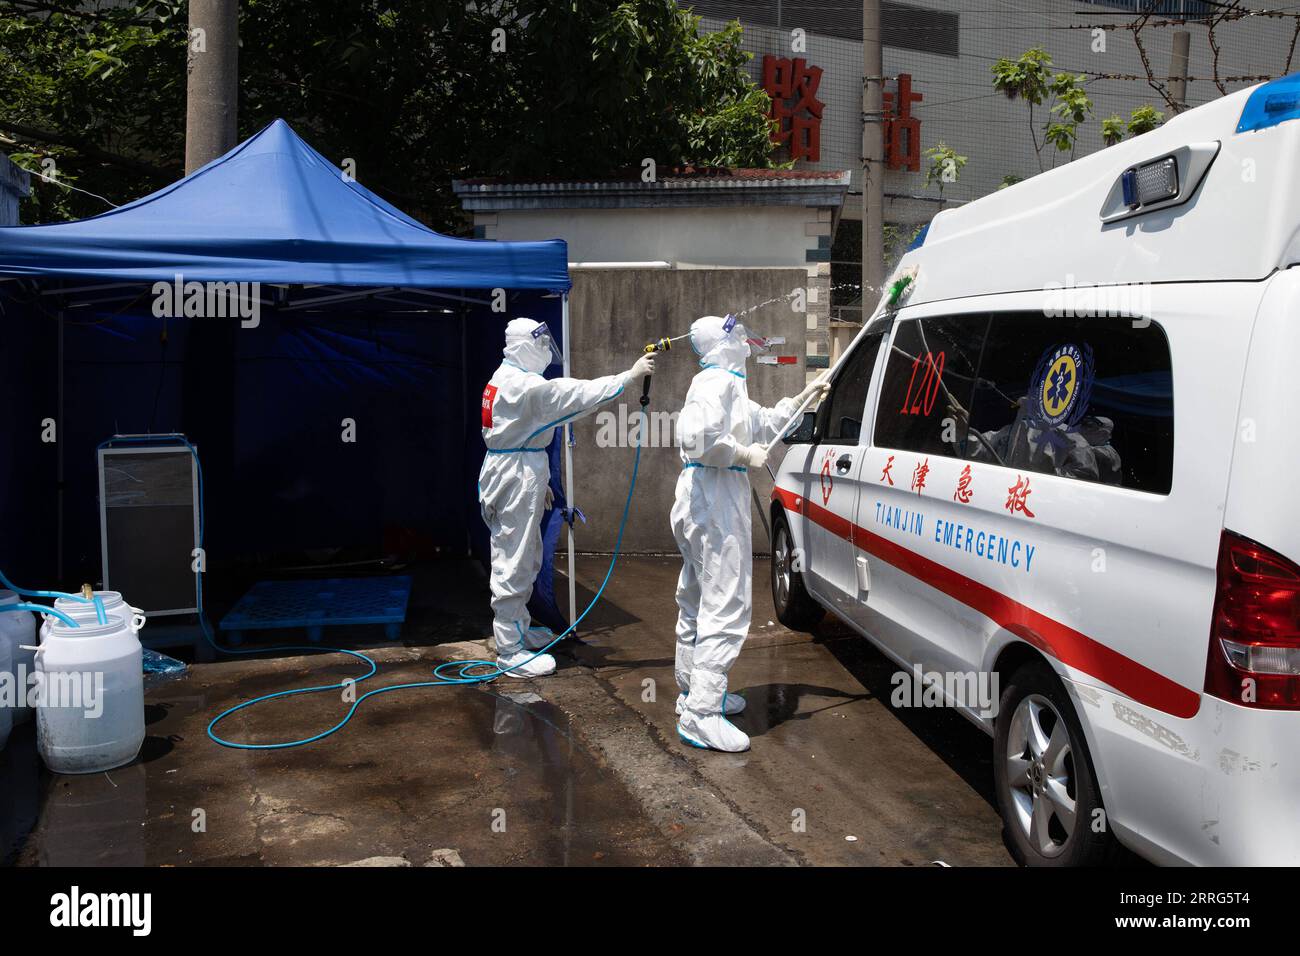 220510 -- SHANGHAI, May 10, 2022 -- Meng Xiangjun L and Zhang Zhimin disinfect an ambulance near the headquarters of a medical emergency team in east China s Shanghai, May 9, 2022. A medical emergency team consisting of 108 members with 50 ambulances from north China s Tianjin has arrived at Shanghai to assist in the city s public medical emergency service amid the COVID-19 resurgence.  CHINA-SHANGHAI-MEDICAL TEAM-COVID-19-AID CN JinxLiwang PUBLICATIONxNOTxINxCHN Stock Photo